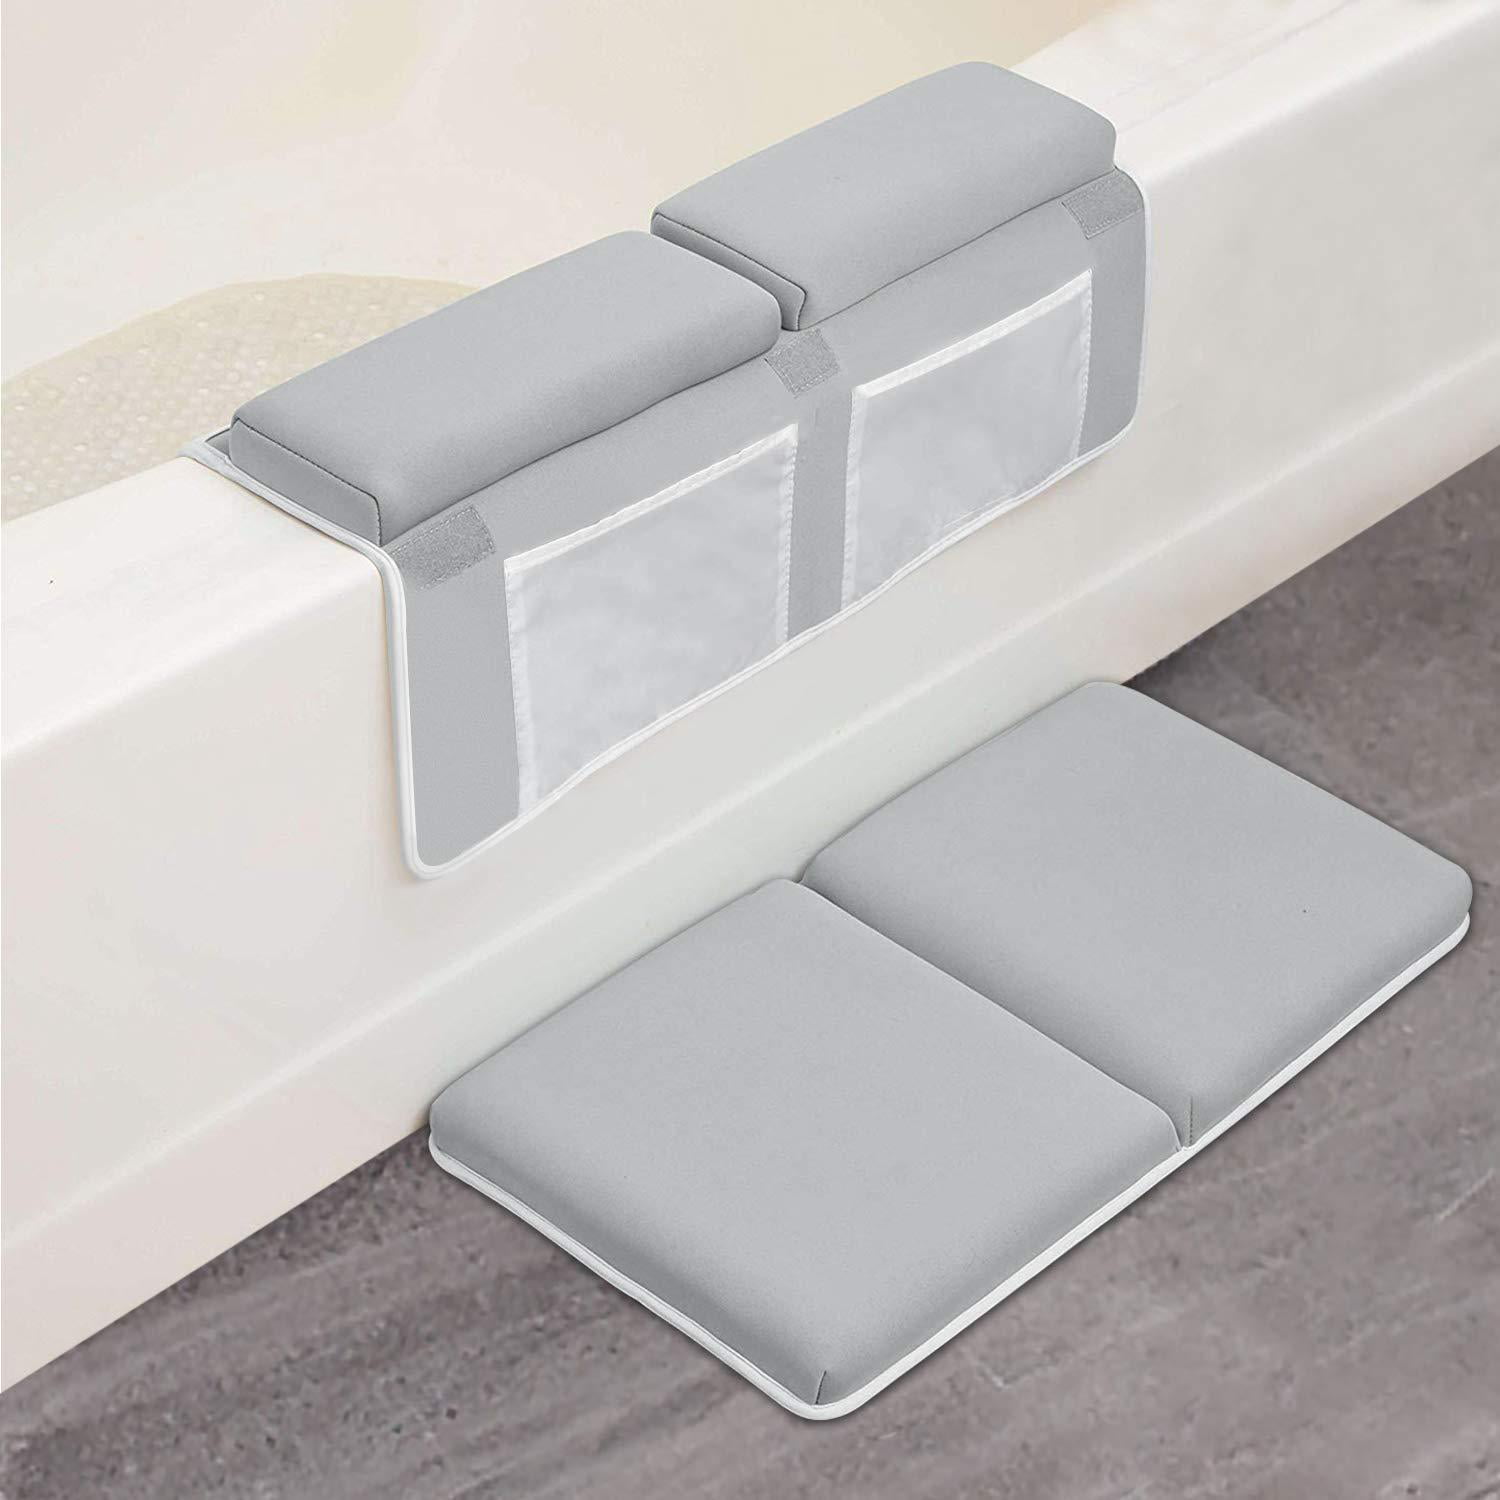 Bath Kneeler thick 1.5" Elbow Rest Set with 36 EVA Letters Gray for Bath Tub 